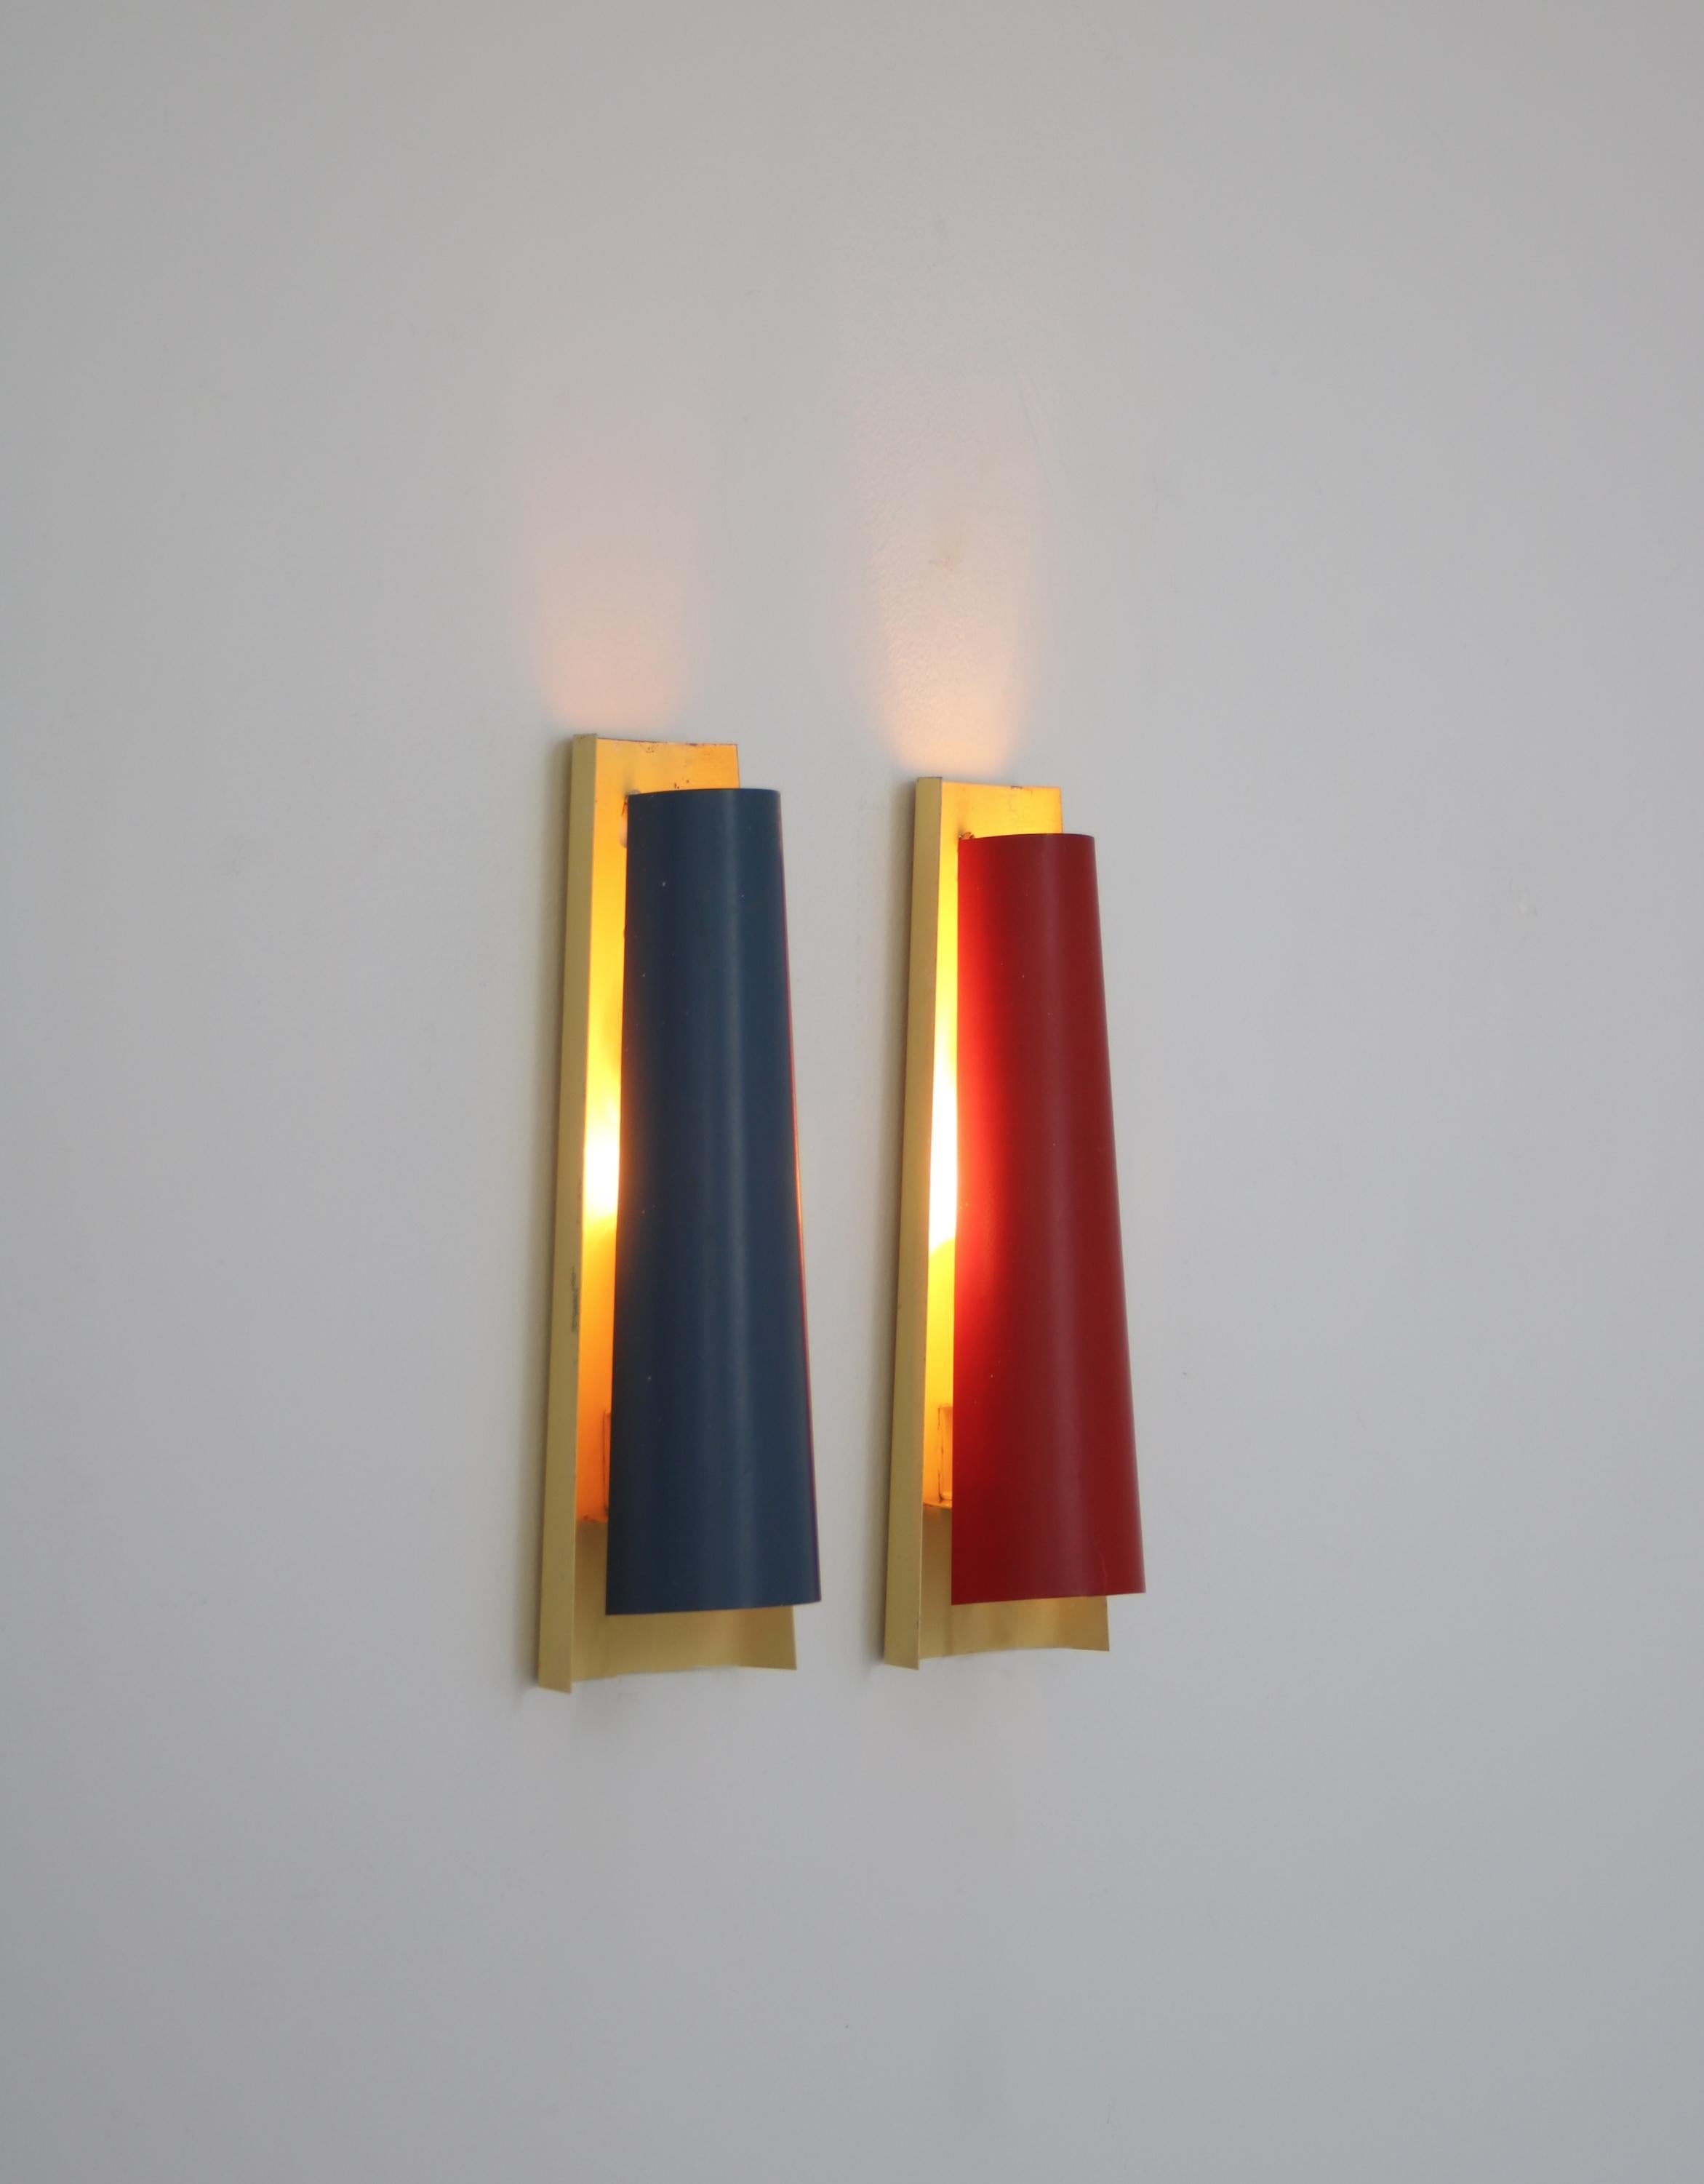 Rare pair of Danish Modern wall sconces designed in 1963 by Henning Wind-Hansen and manufactured at Voss Belysning (Voss Lighting). The sconces are made from lacquered metal plates. Marked by maker.